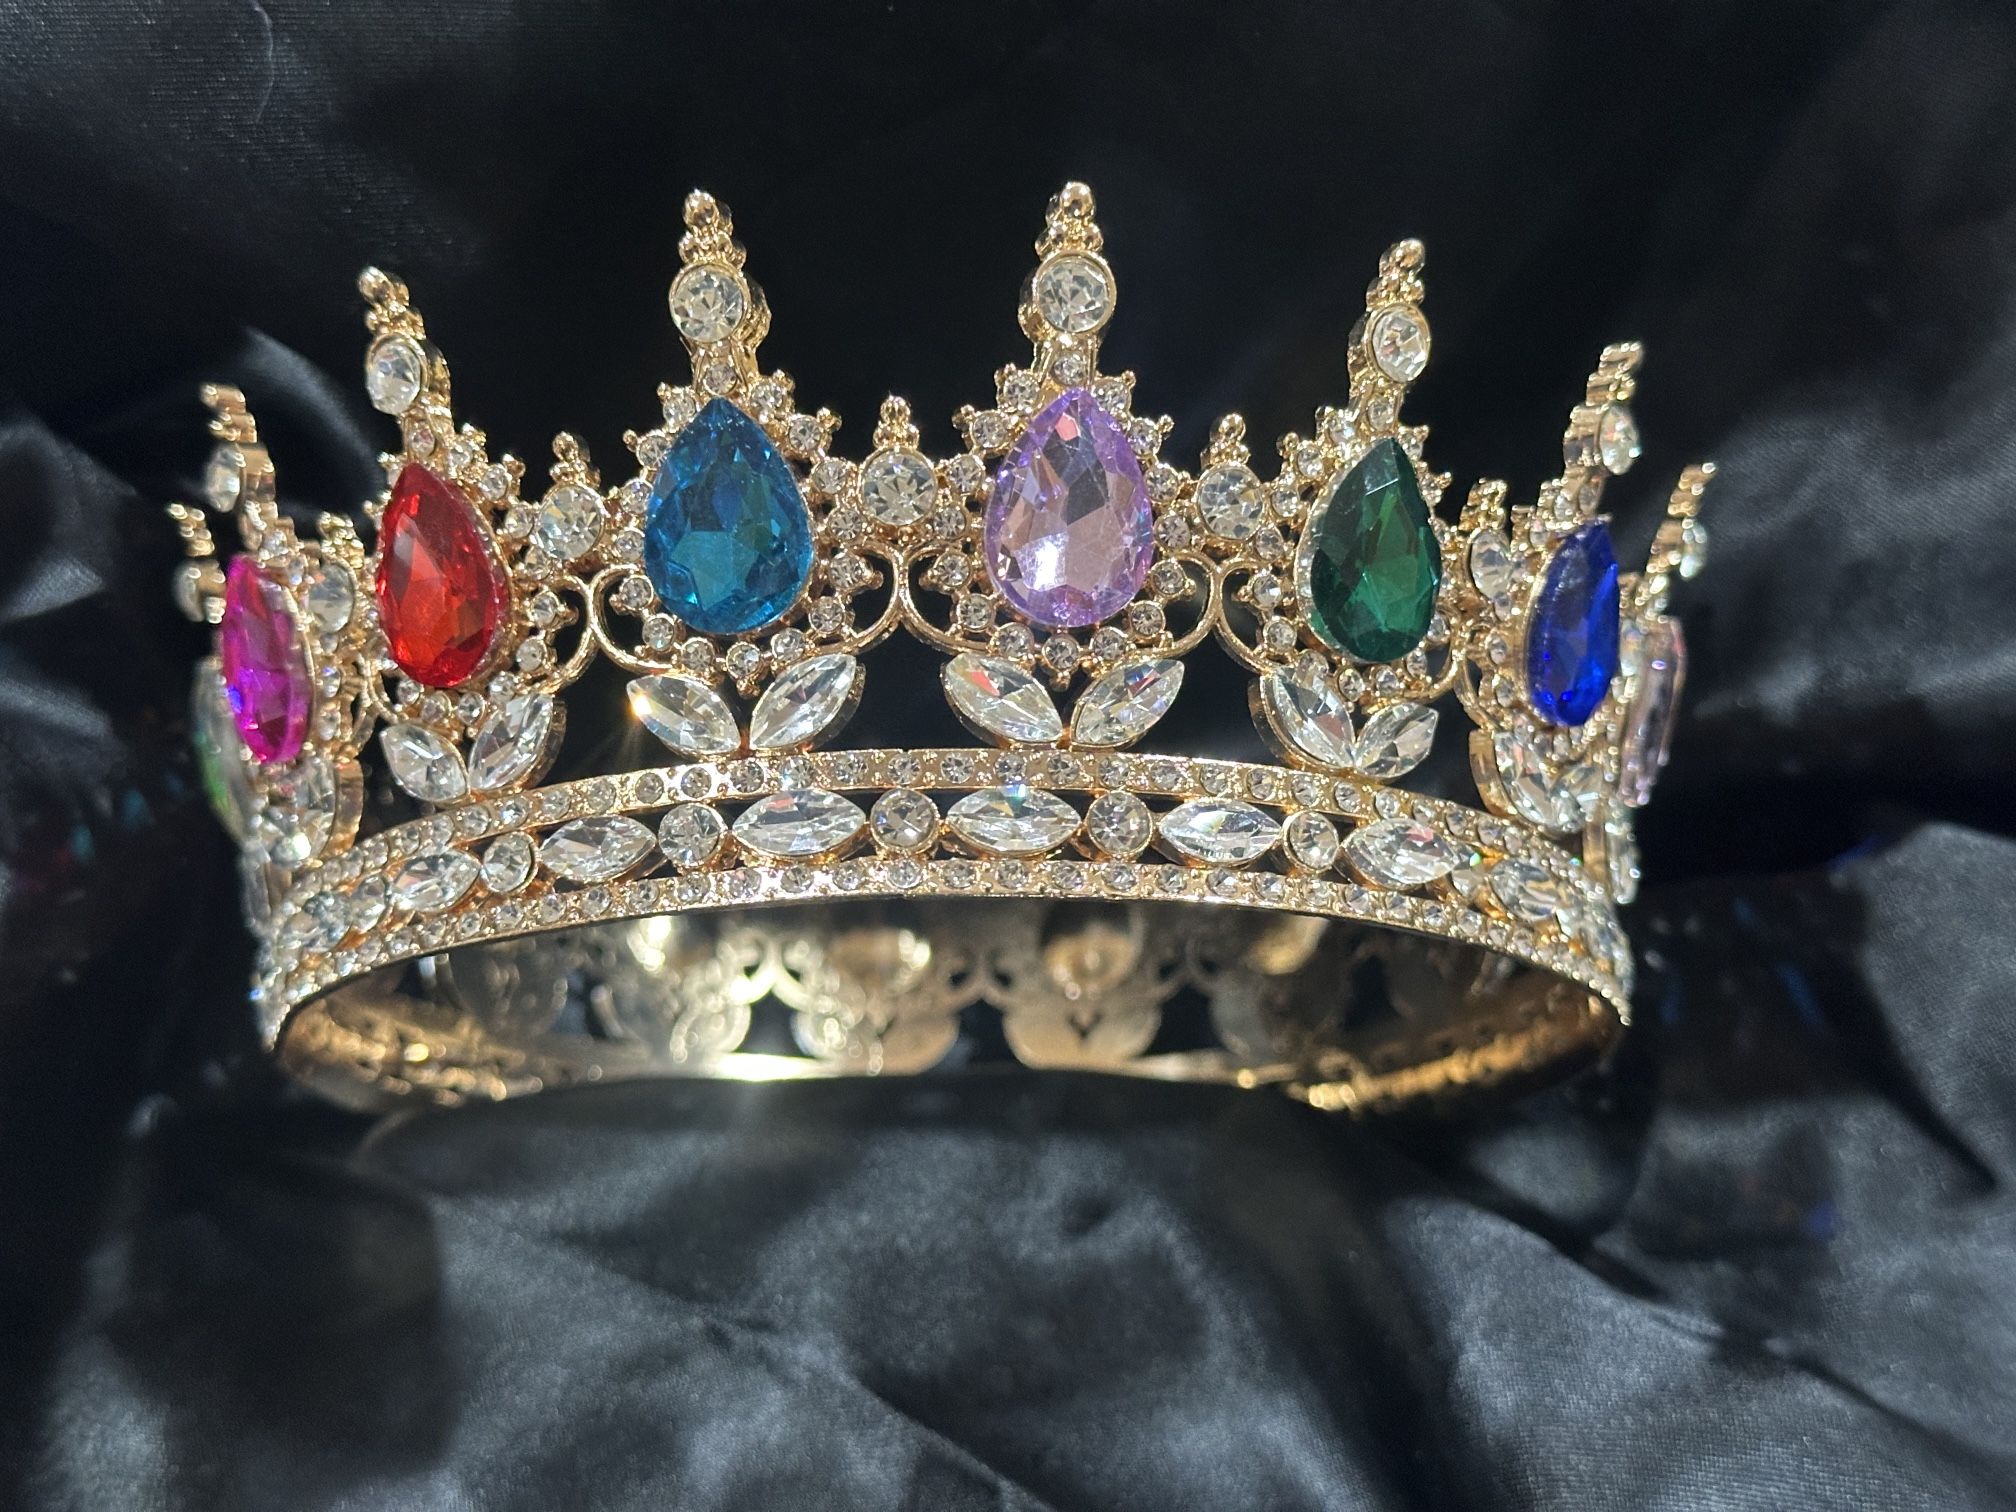 Stunning Crown Tiara Crystal Head Piece. Perfect Mother’s Day Gift For The Queen